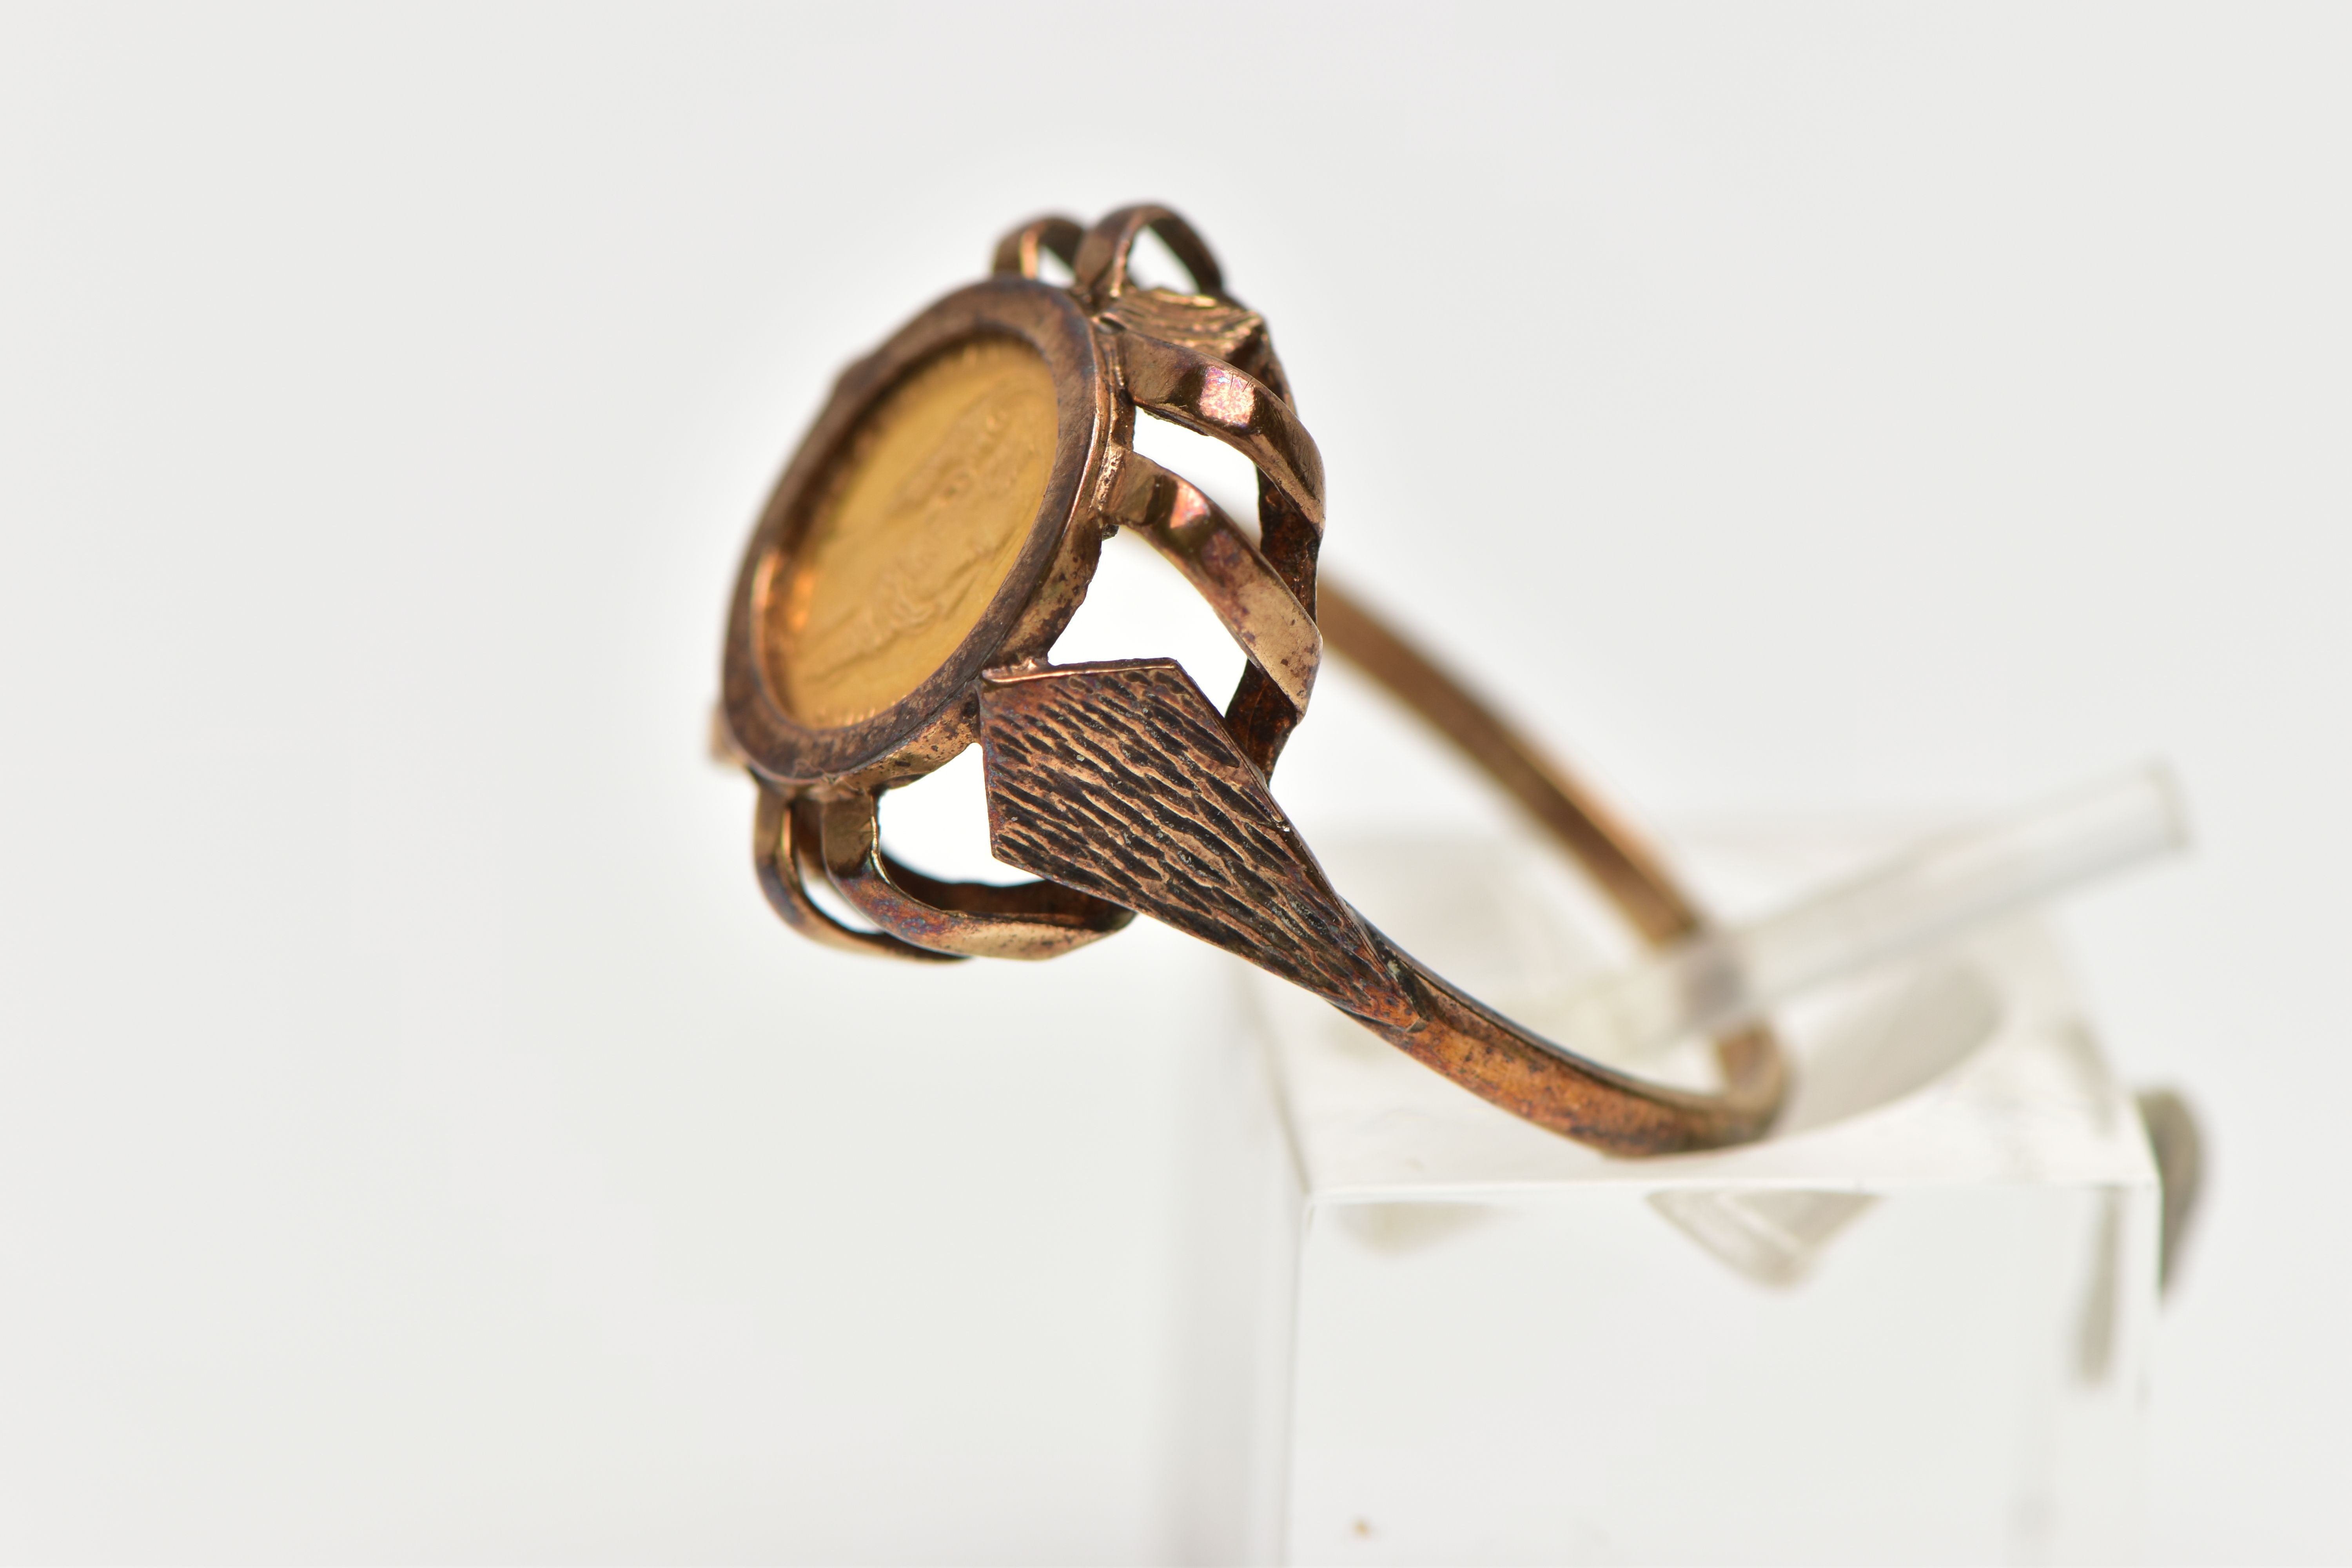 A 9CT YELLOW GOLD COIN RING WITH MEXICAN COIN, the ring set with a Mexican Maximiliano coin, dated - Image 2 of 4